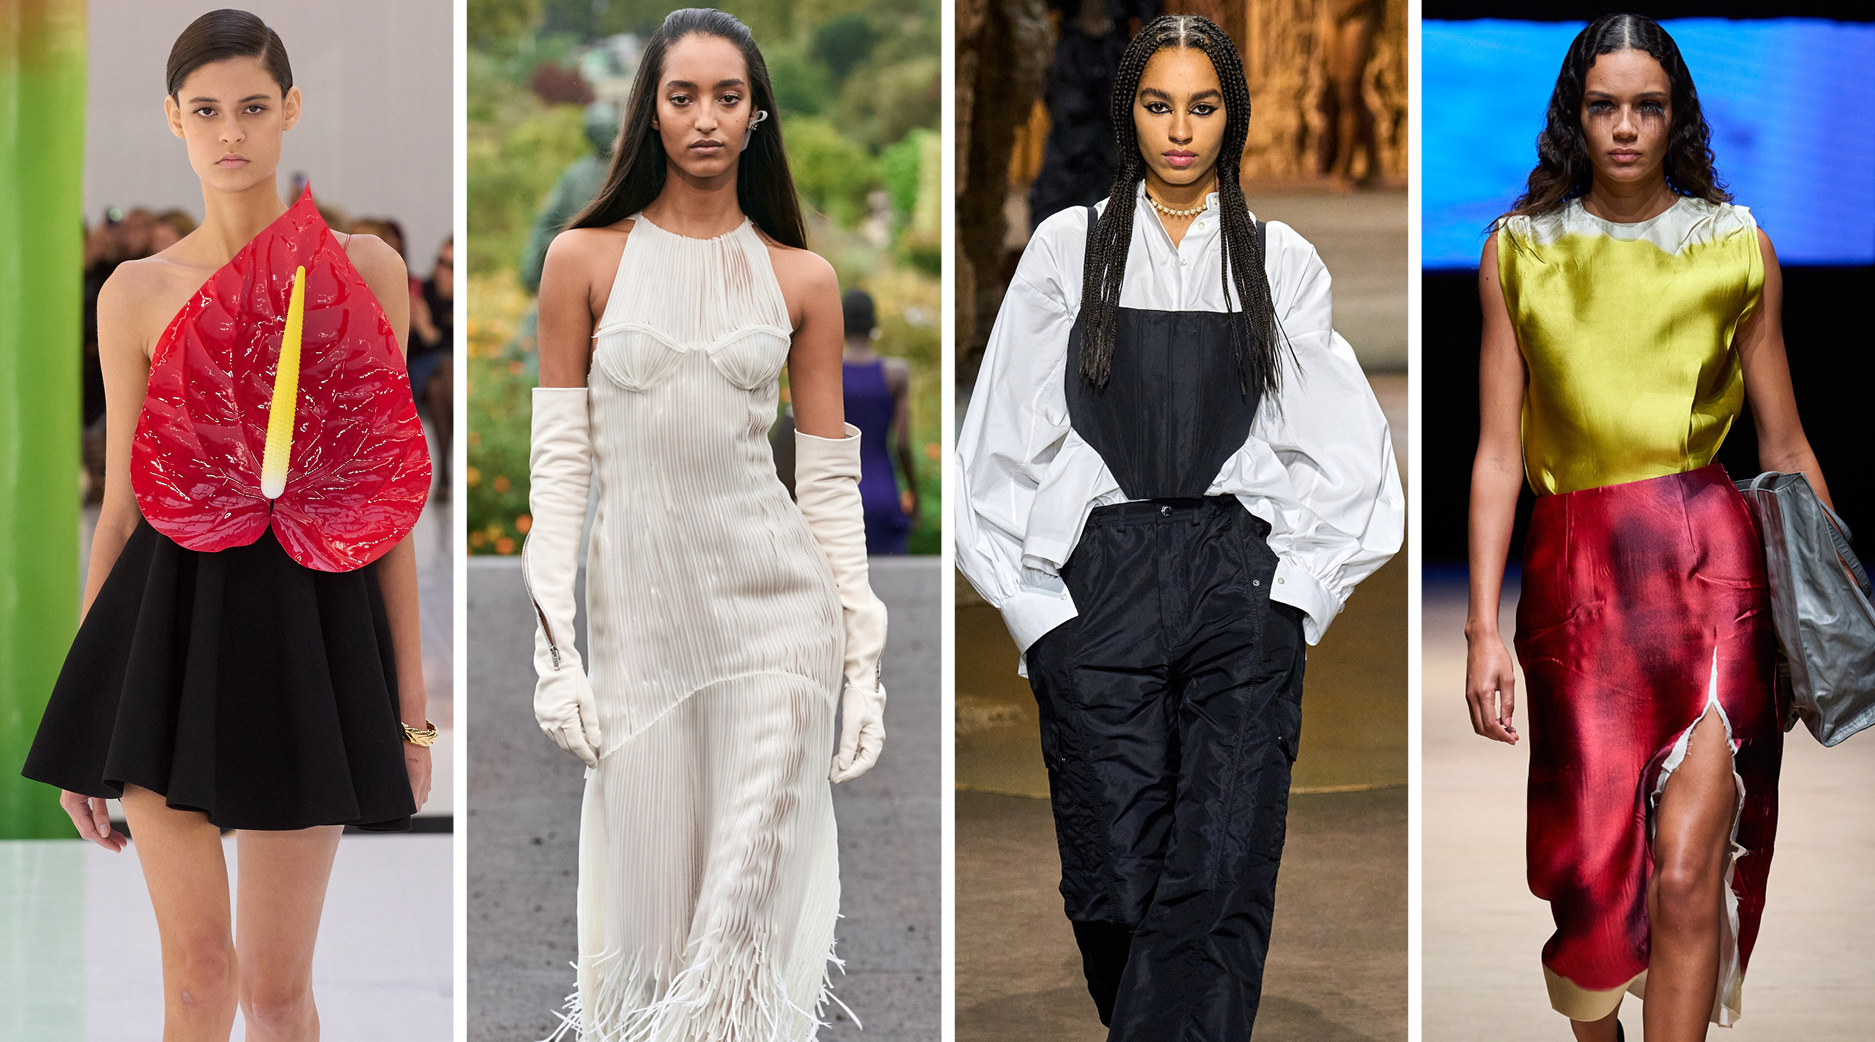 Fashion month report: All the best looks and runways from Spring/Summer 2023